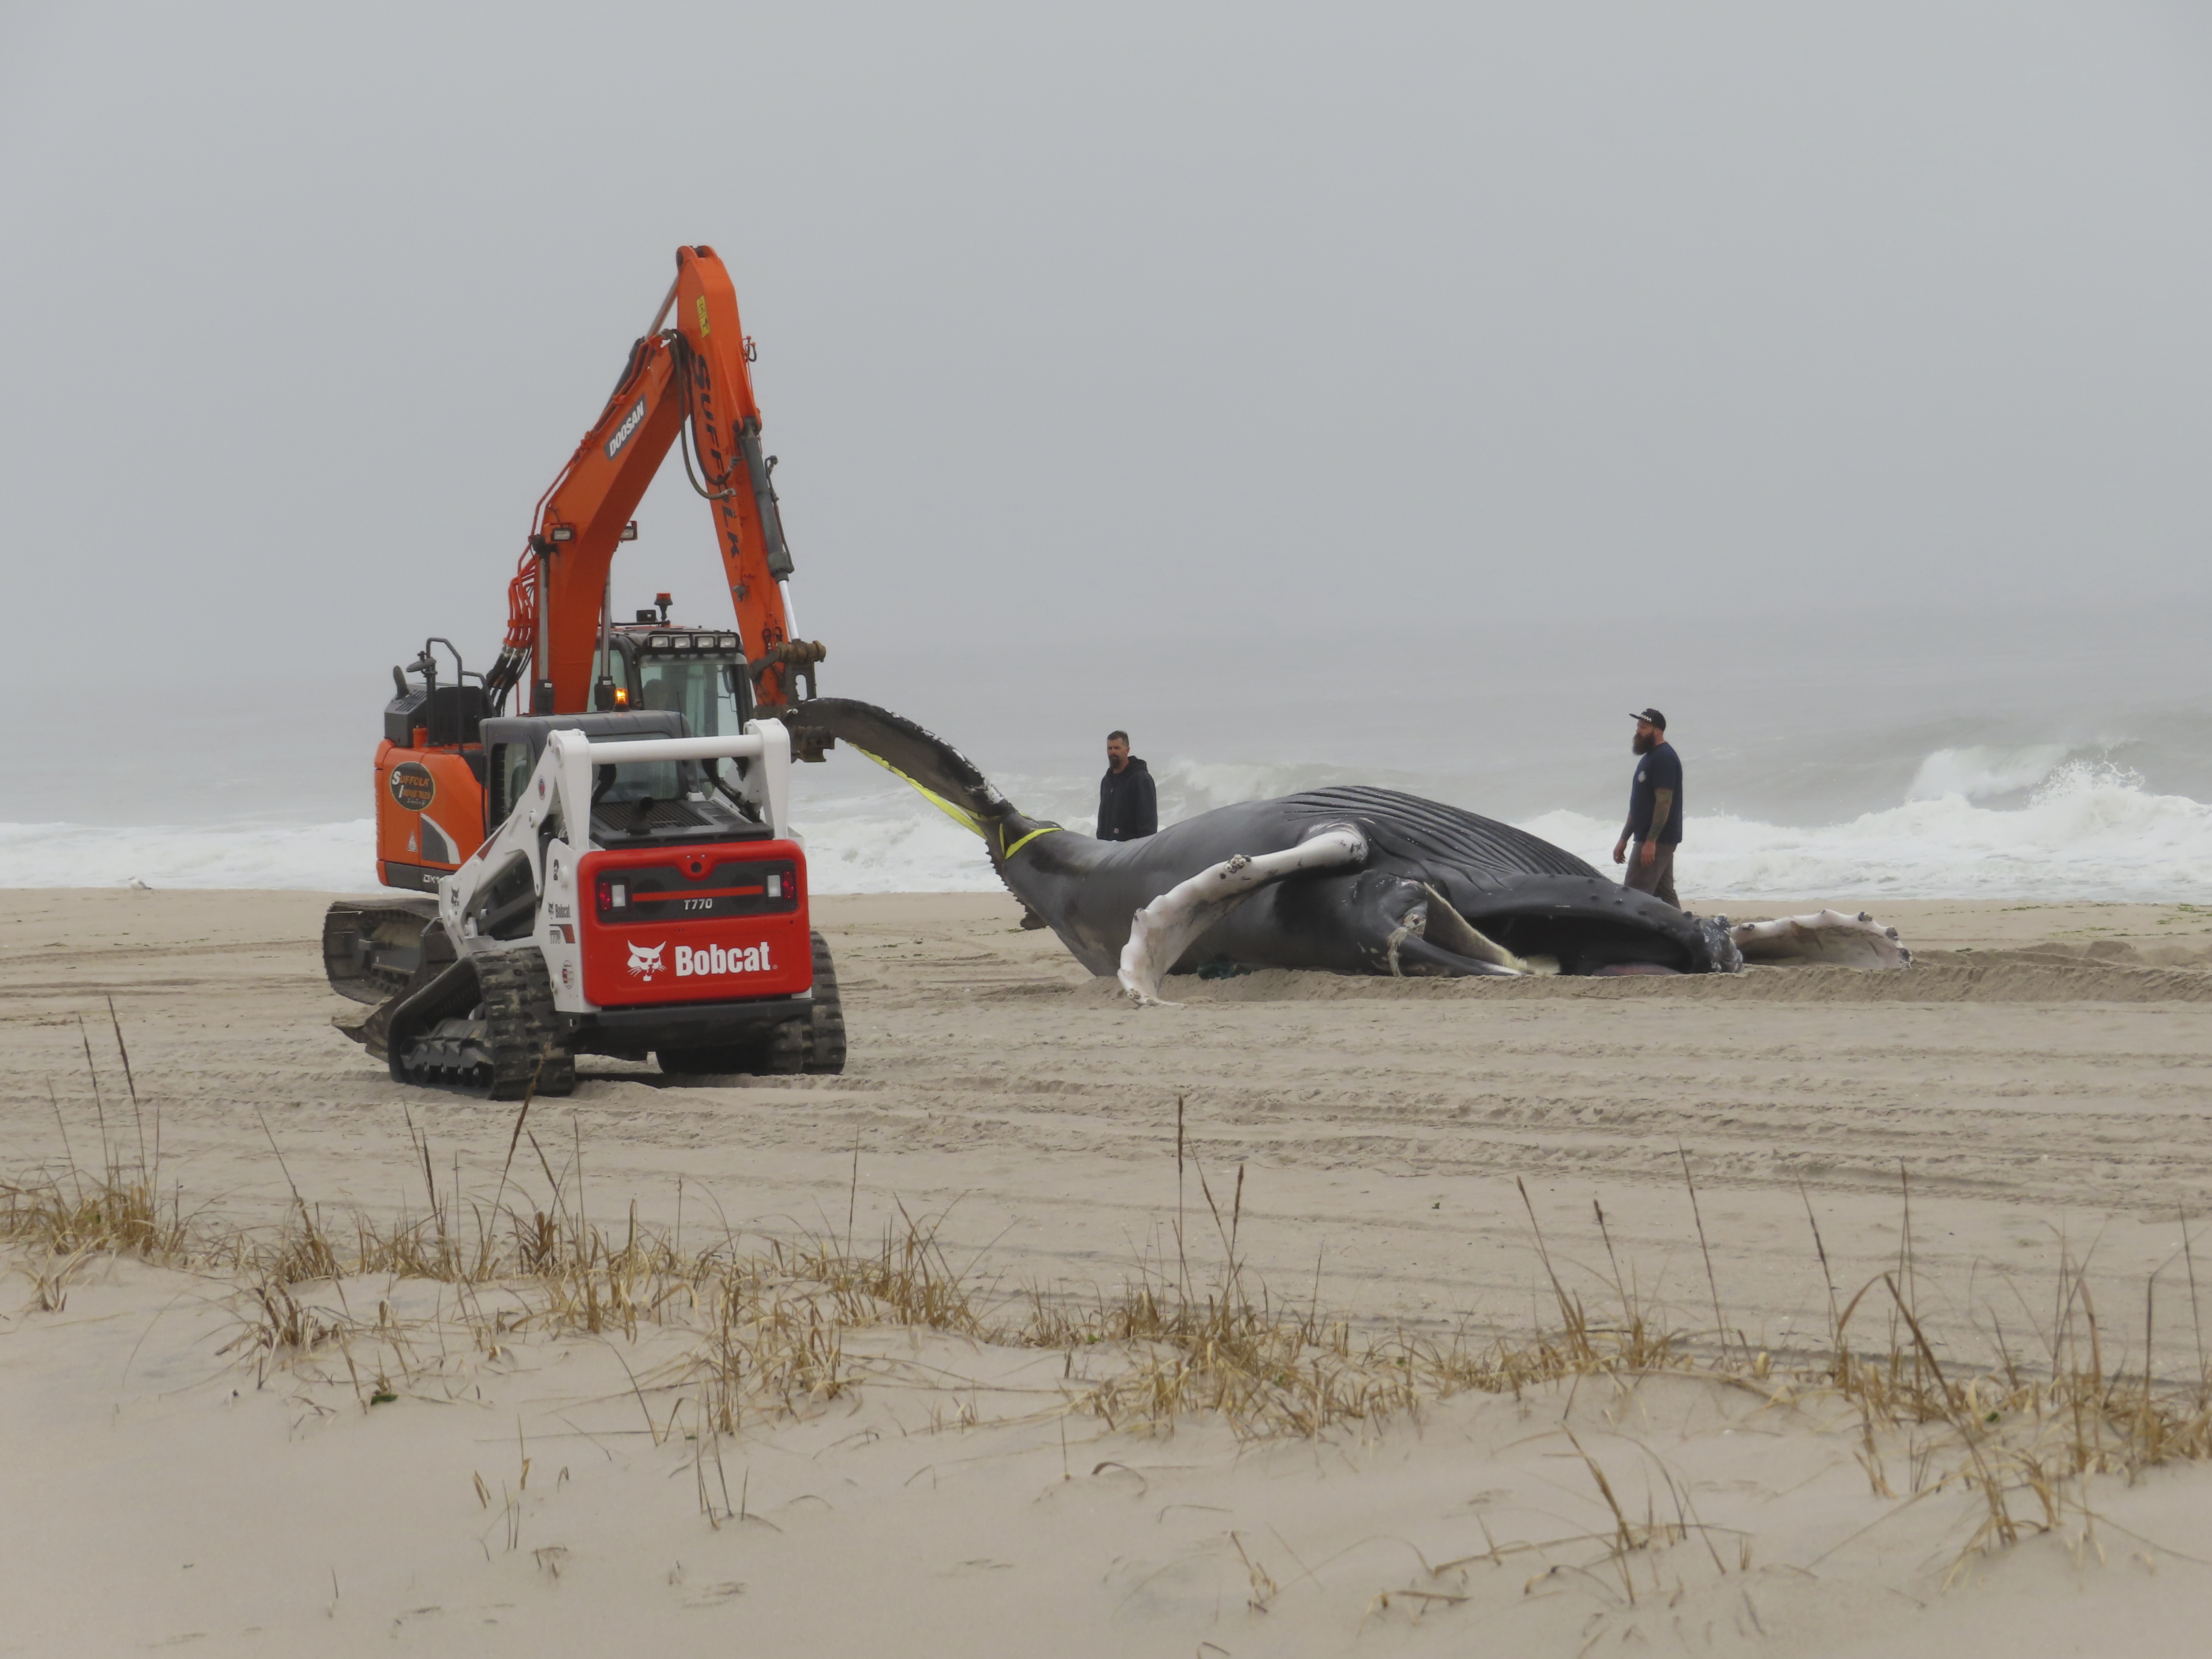 4th whale death in region reported in Va. Beach, officials say